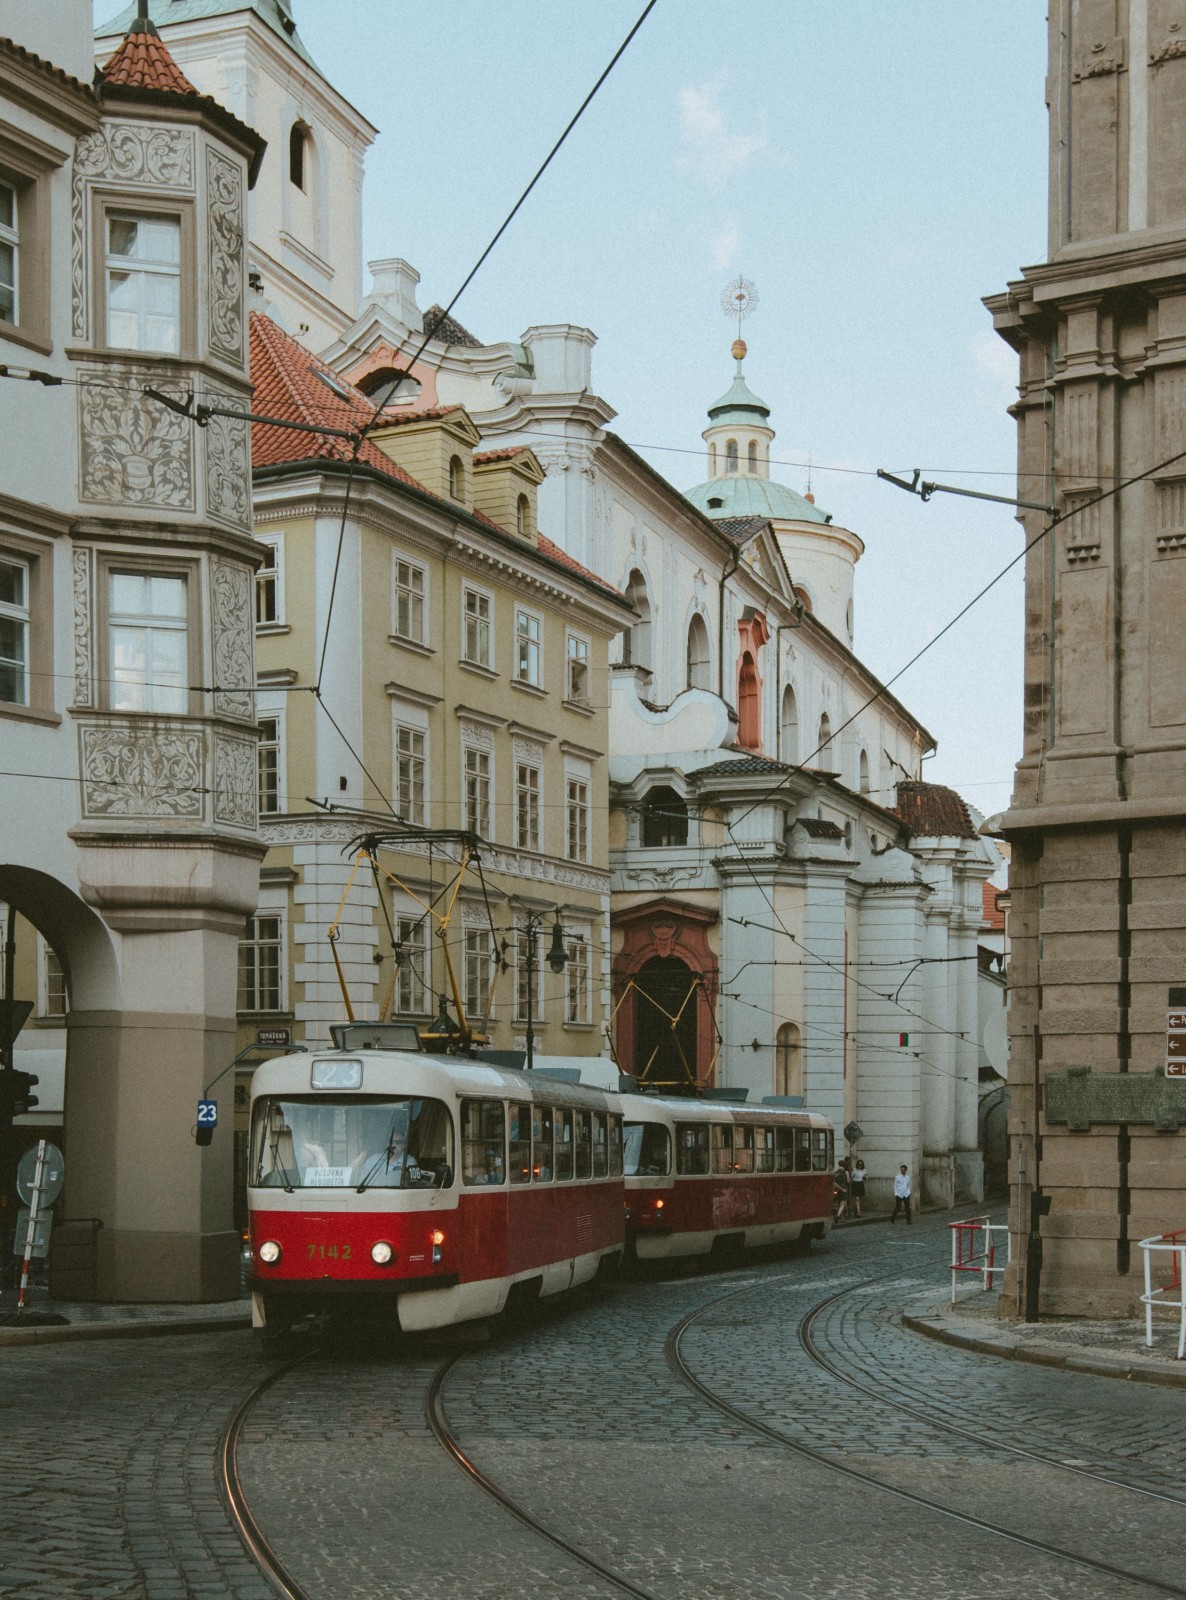 A tram making its way through the streets of Prague